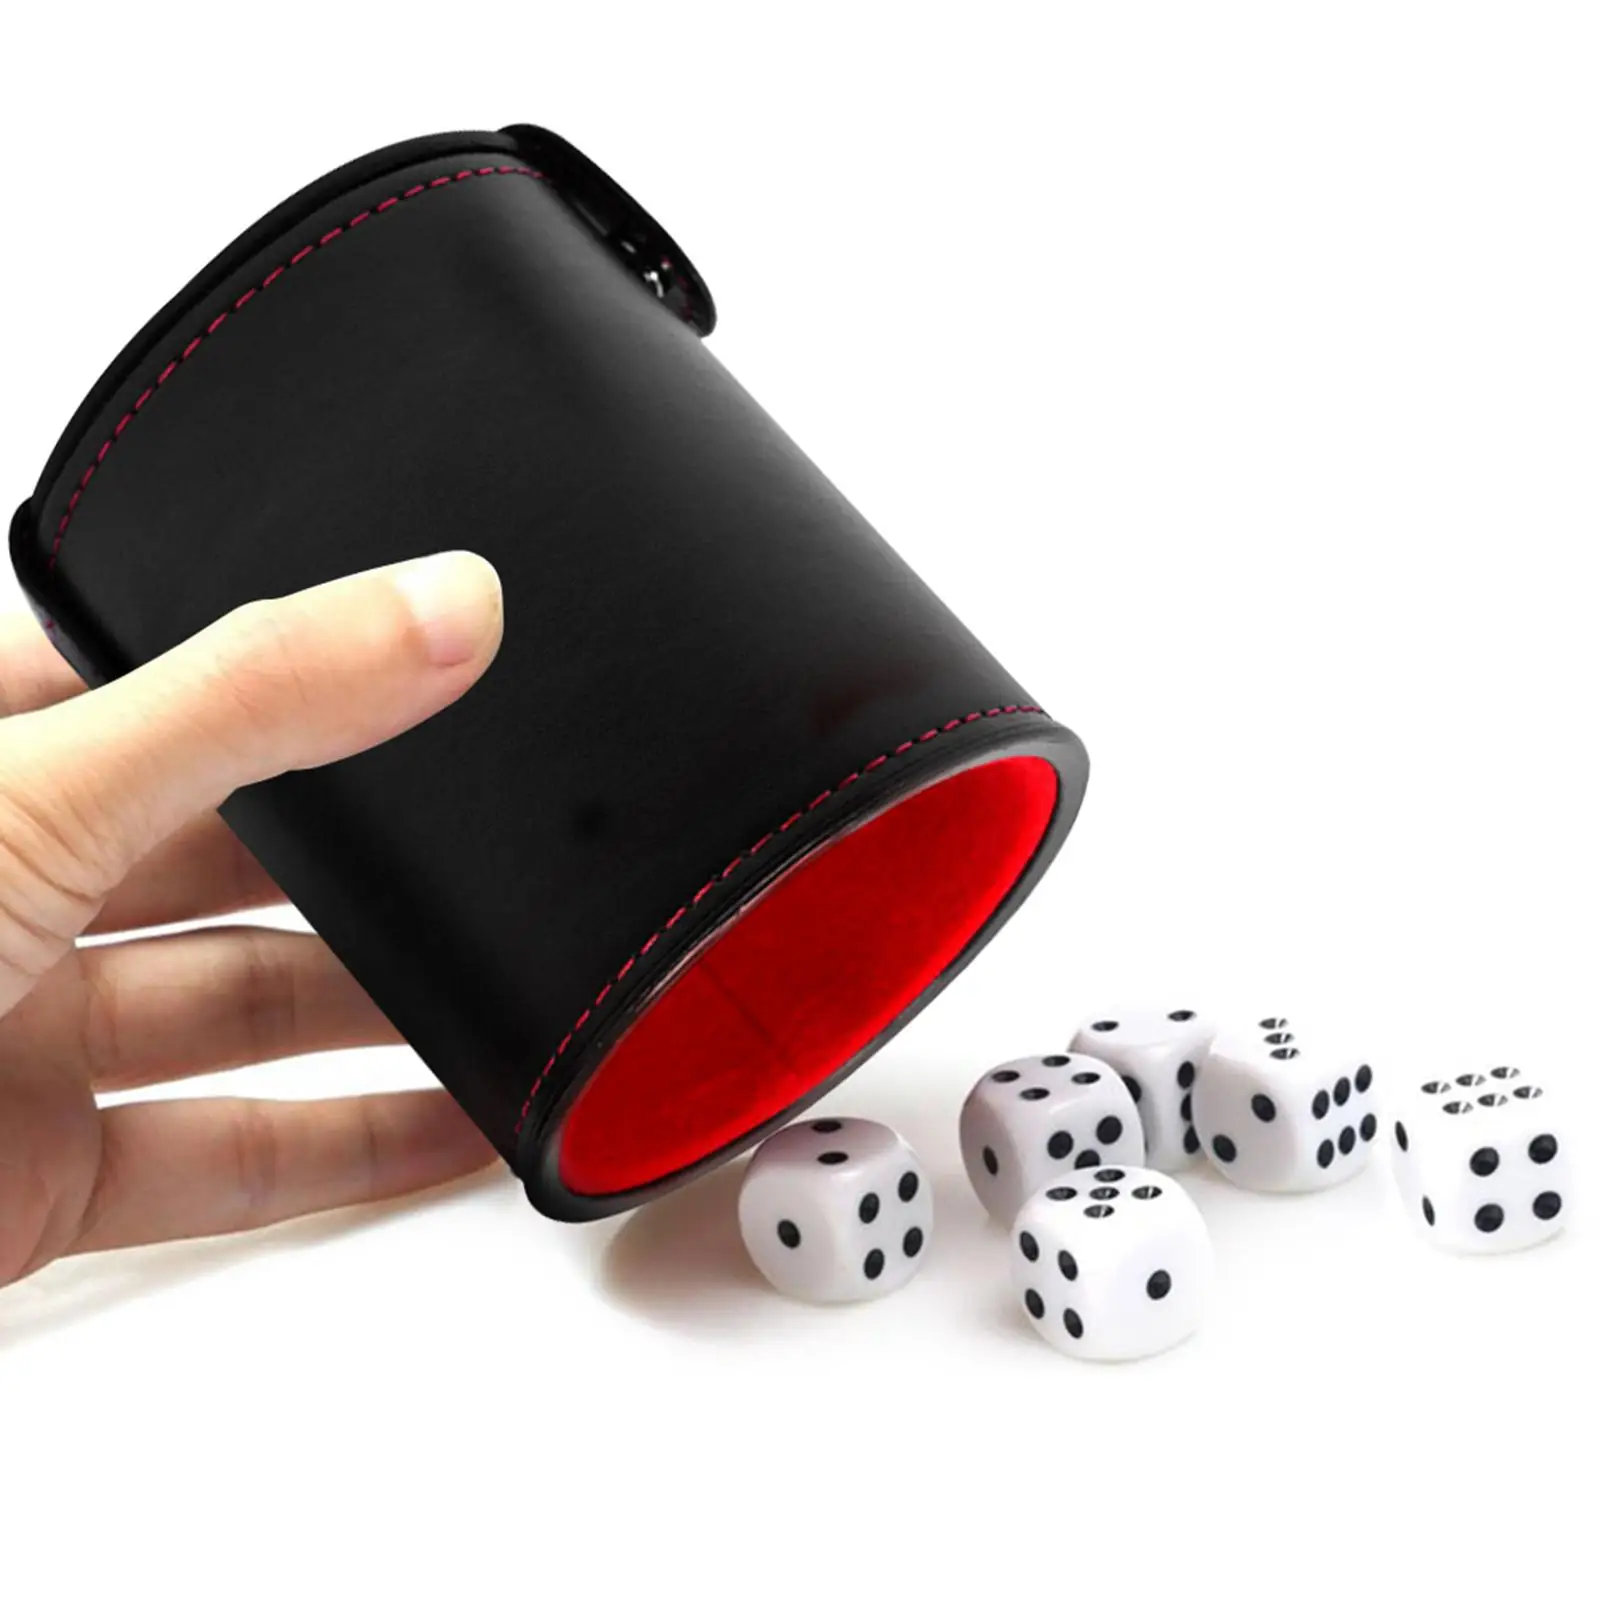 PU Leather Dice Cup with 5 Dice Hand Shaking Dice Cup Supplies for Halloween